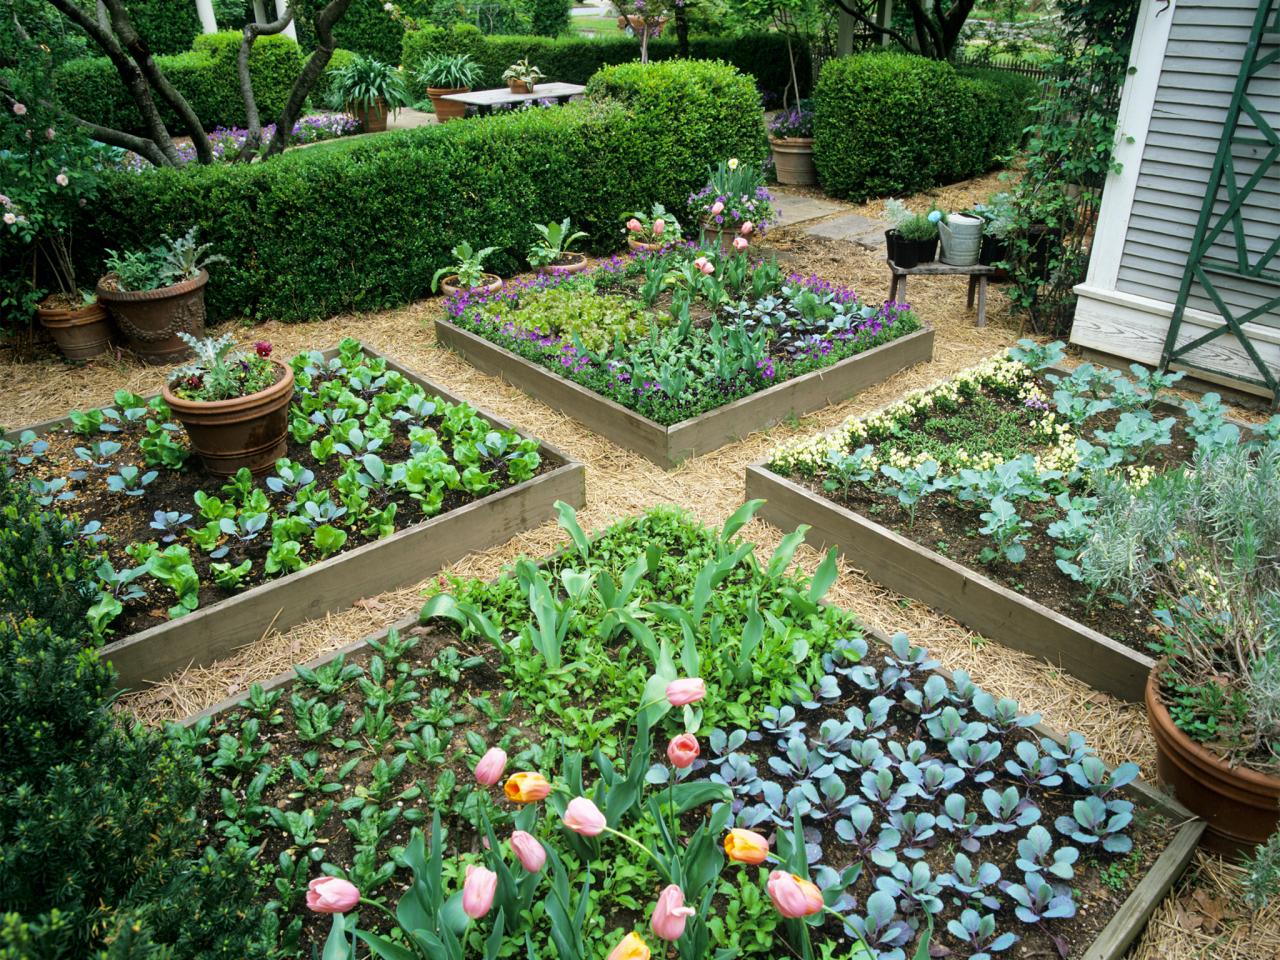 Intensive gardening is defined by making the best, most efficient use of  your growing space